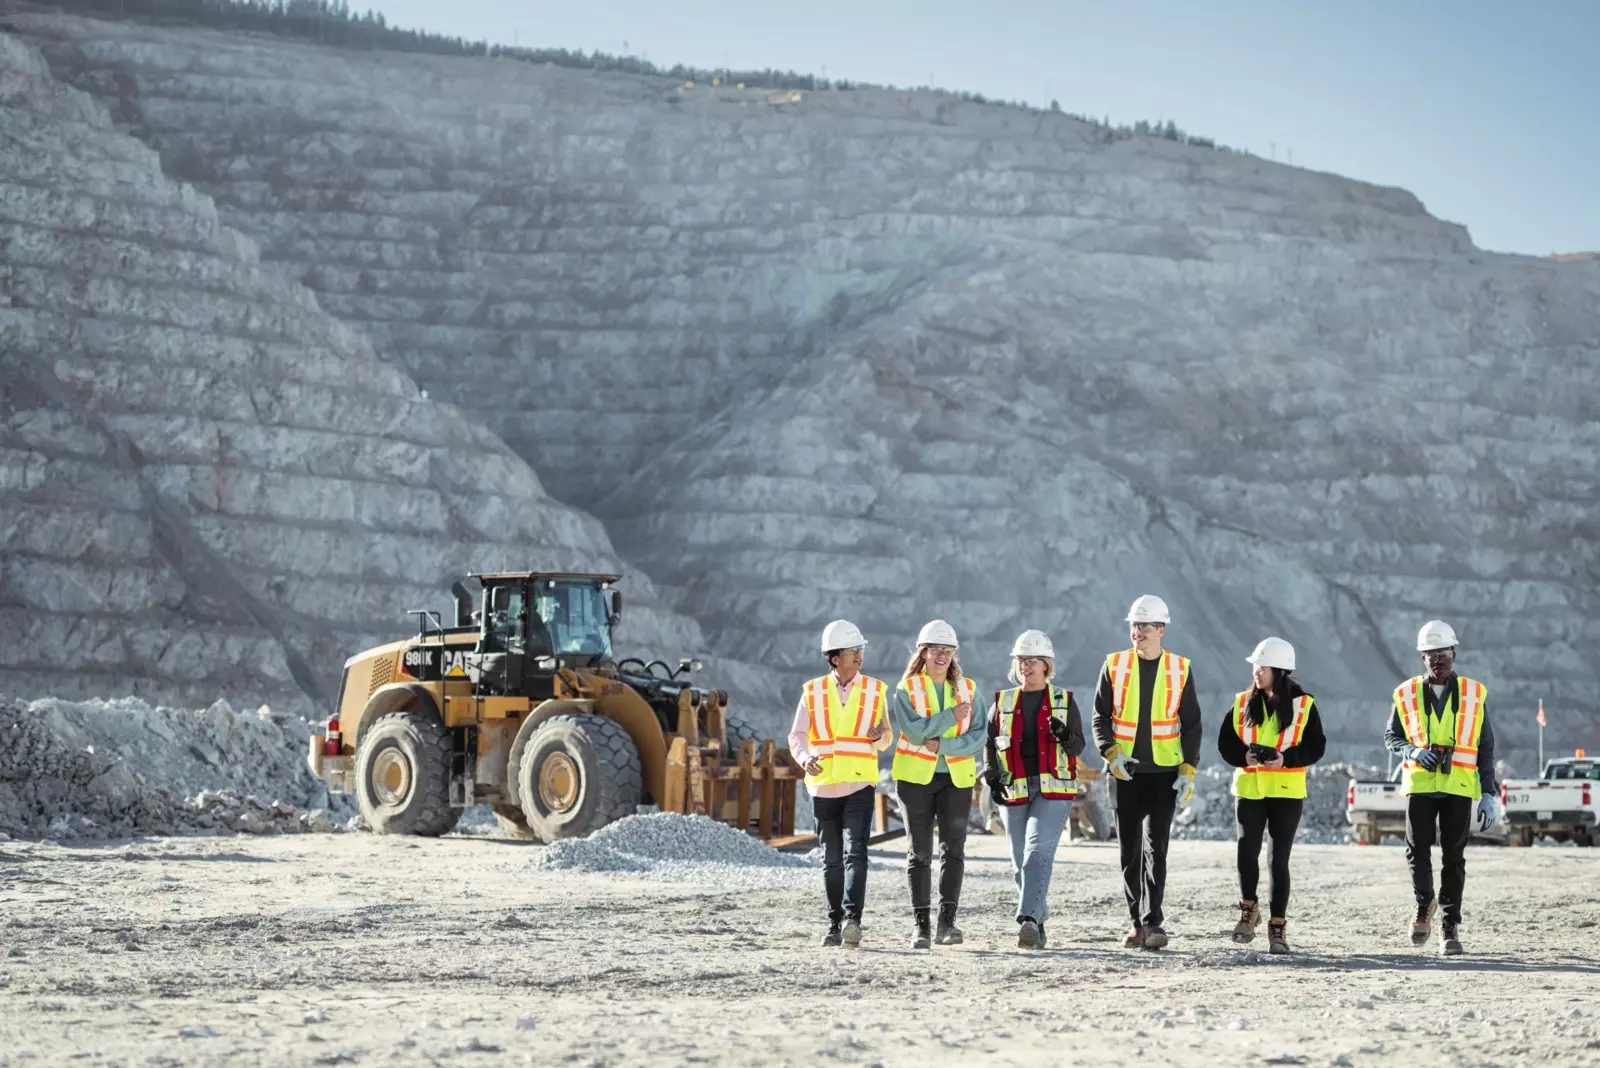 Six workers in safety gear walk through a quarry, with excavator in the background.